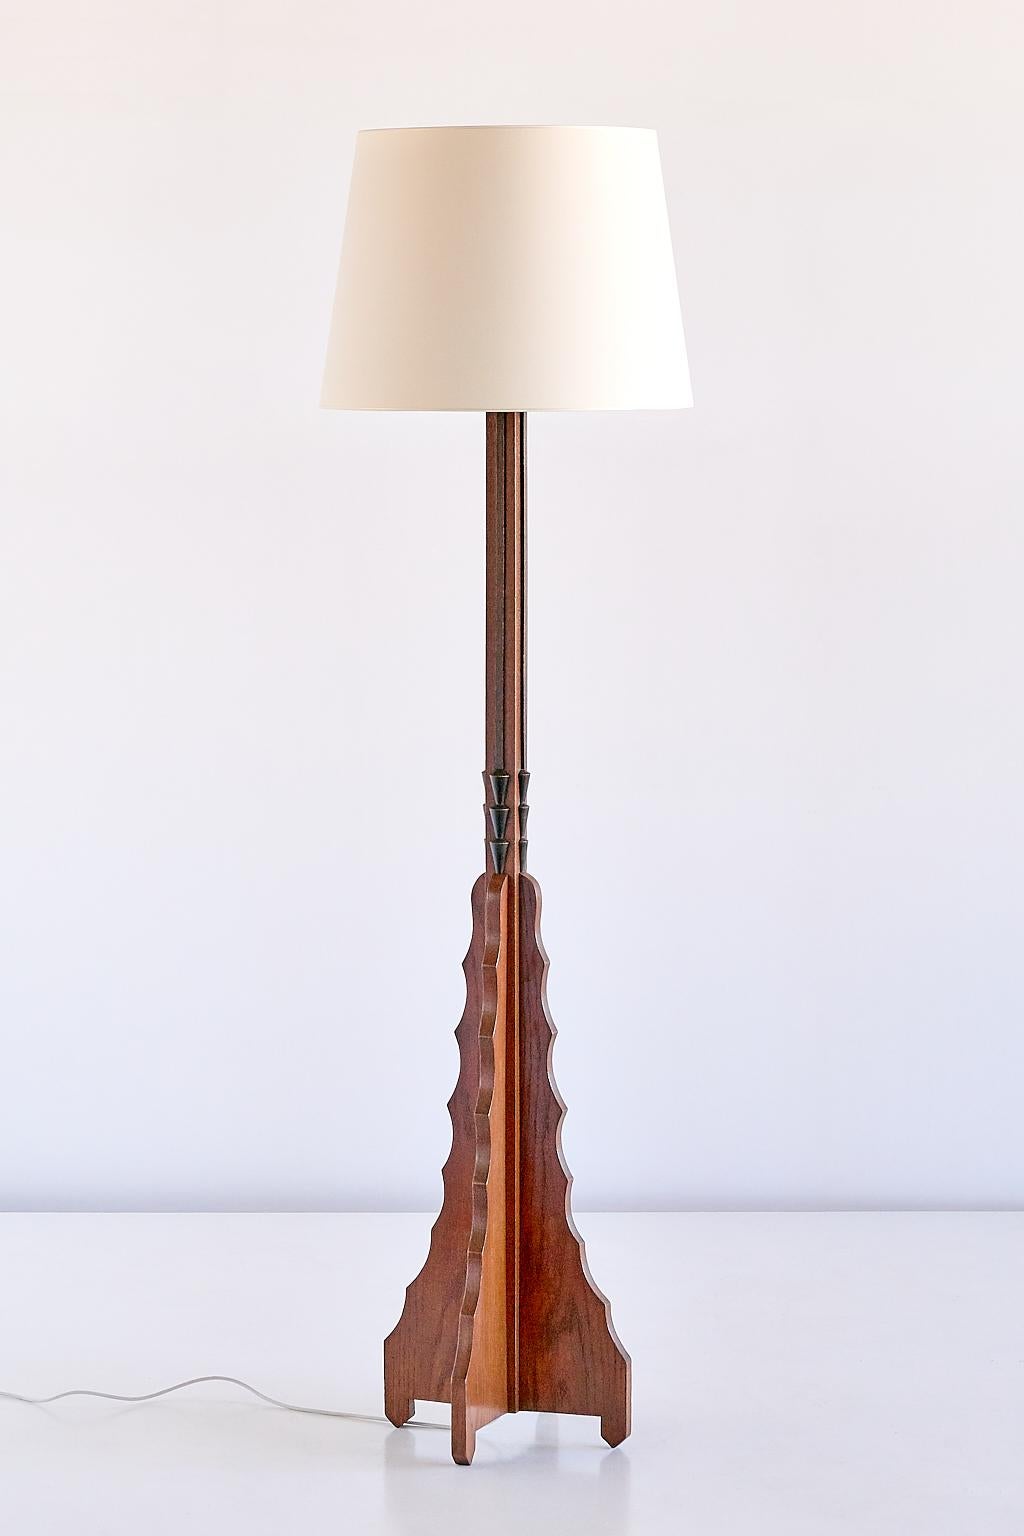 This striking floor lamp was produced in The Netherlands in the early 1930s. The frame in solid and stained oak is defined by the tiered base with an intricately carved pattern. Each side of the middle part of the lamp foot is accentuated by a